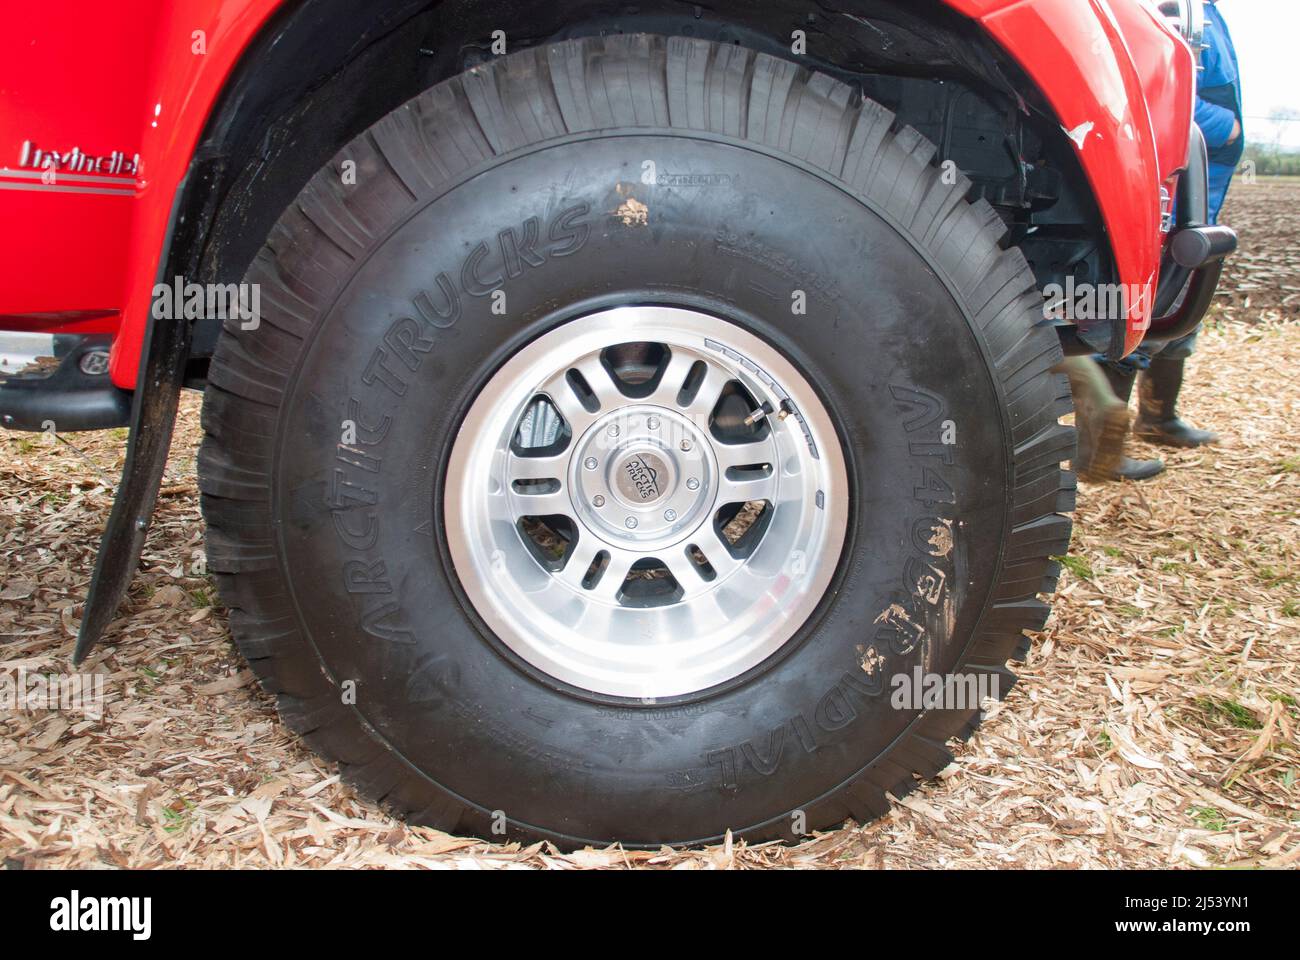 Off-road tyre on a vehicle adapted by Arctic Trucks for extreme conditions.  This vehicle was featured in Top Gear, and took Jeremy Clarkson and James Stock Photo